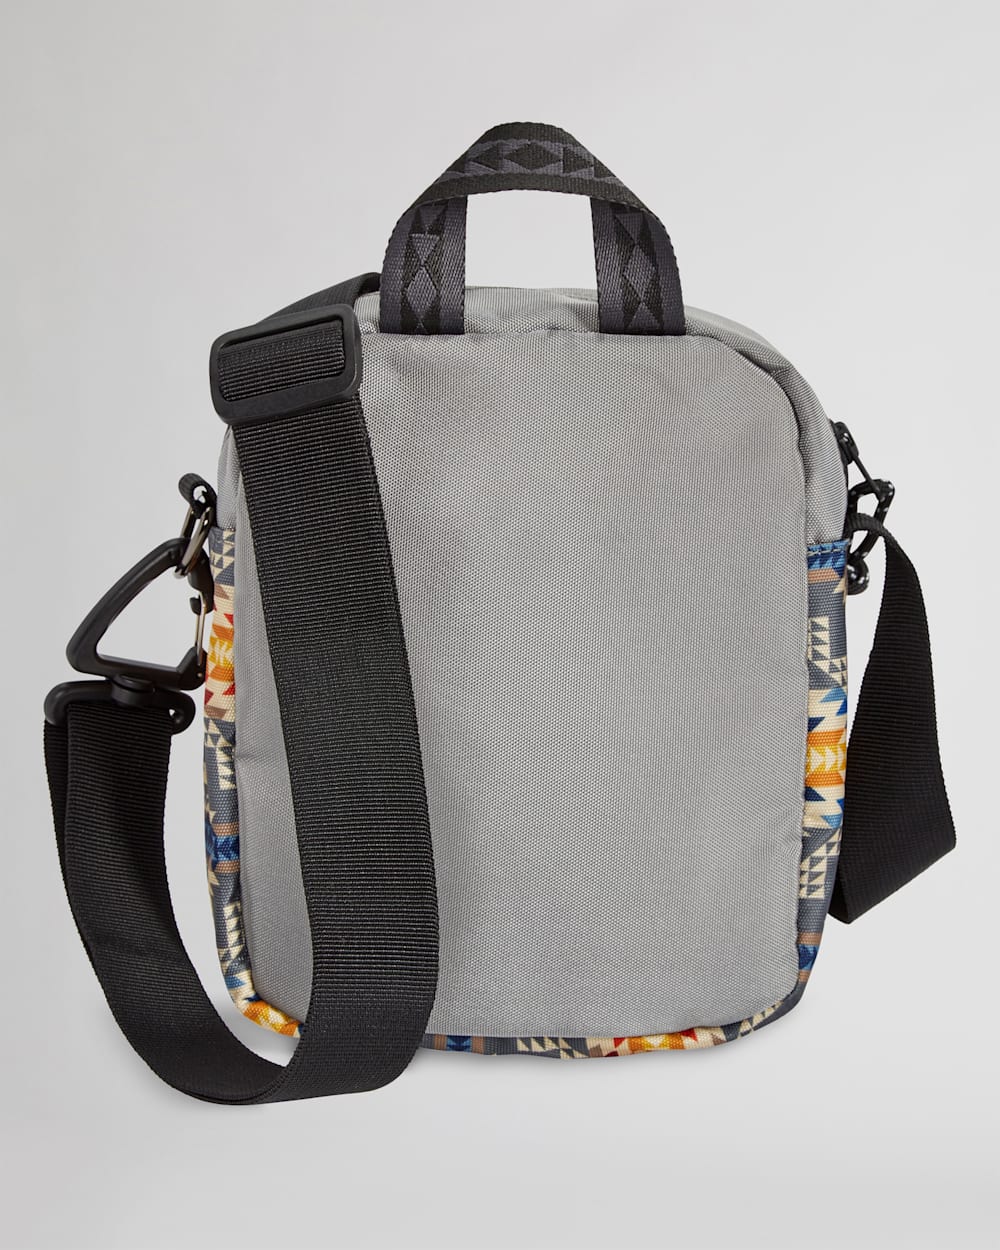 ALTERNATE VIEW OF SMITH ROCK CROSSBODY IN GREY image number 2